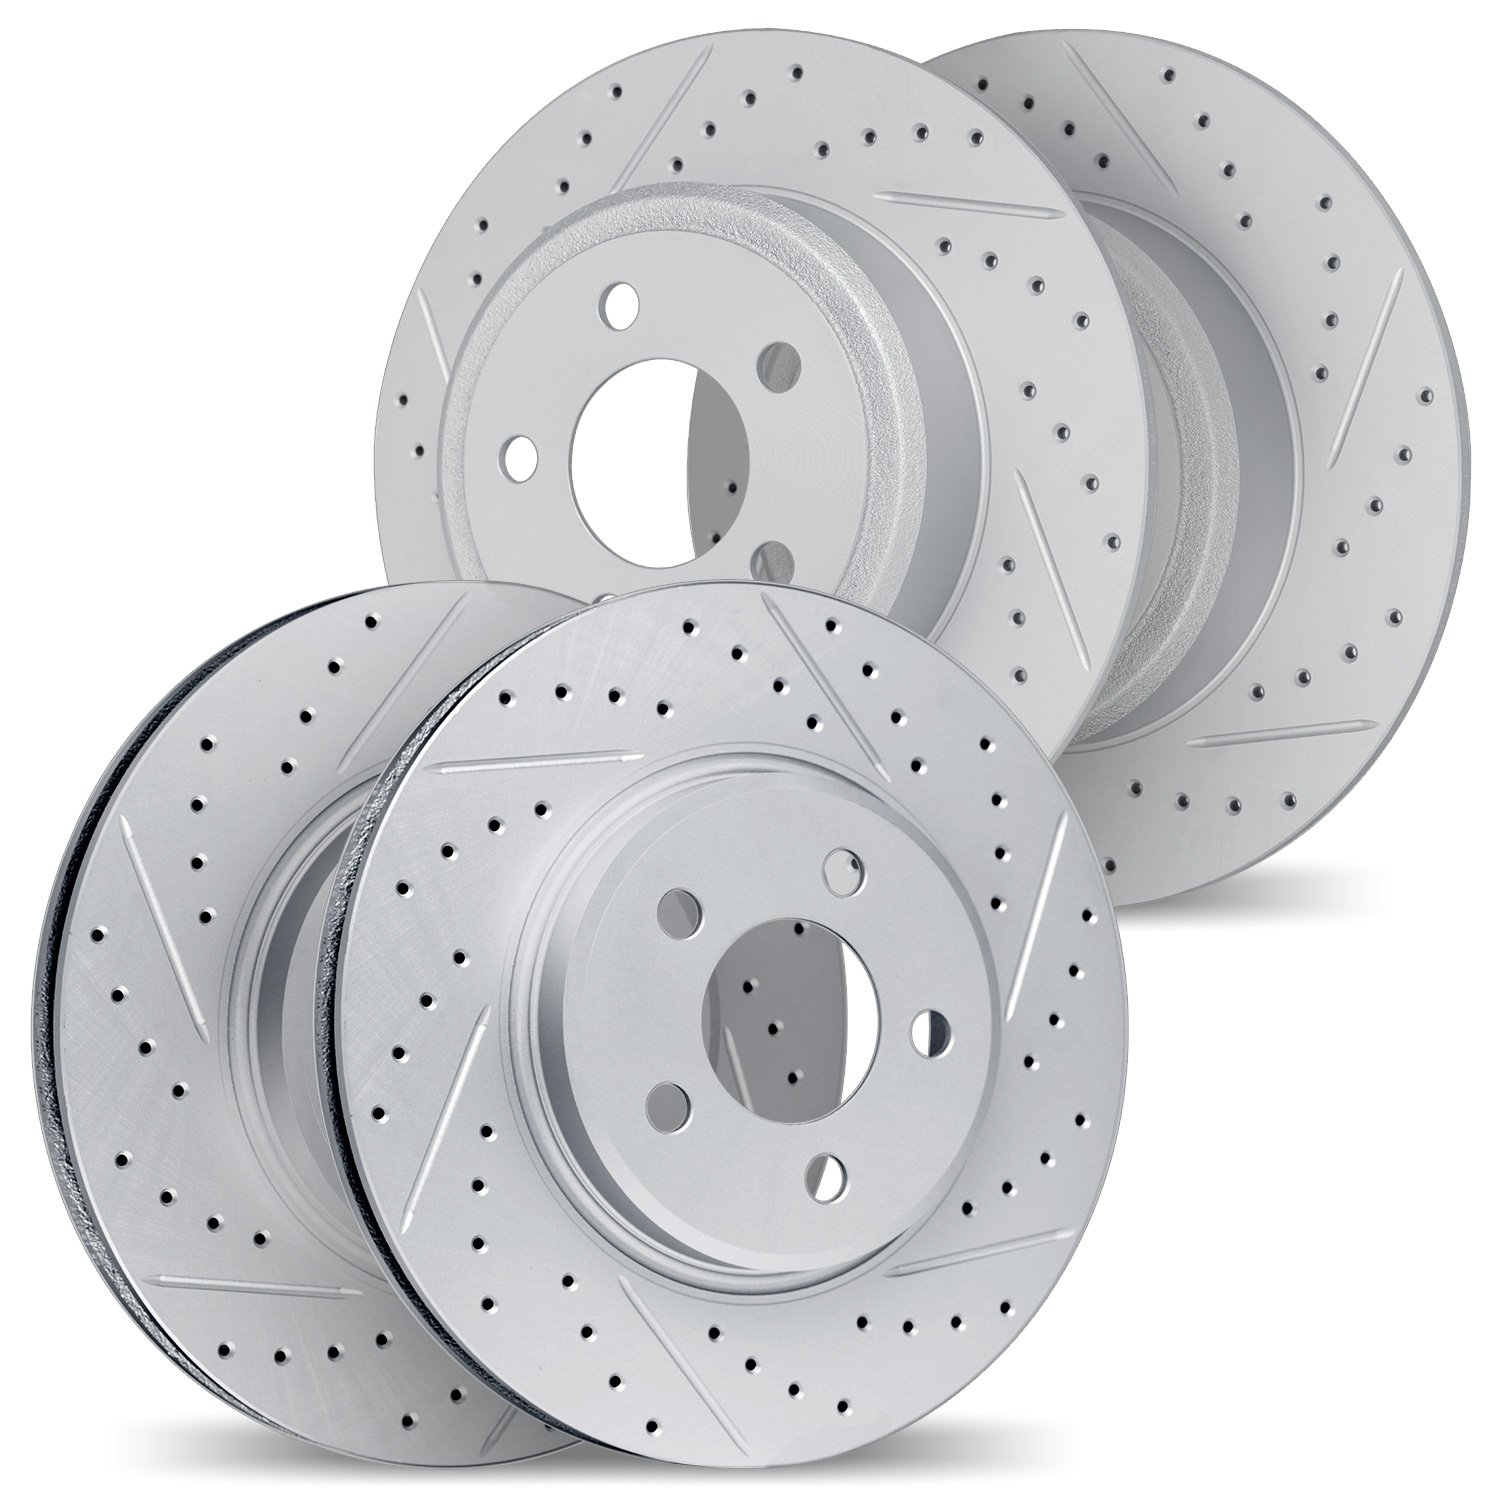 2004-63029 Geoperformance Drilled/Slotted Brake Rotors, 2003-2009 Mercedes-Benz, Position: Front and Rear